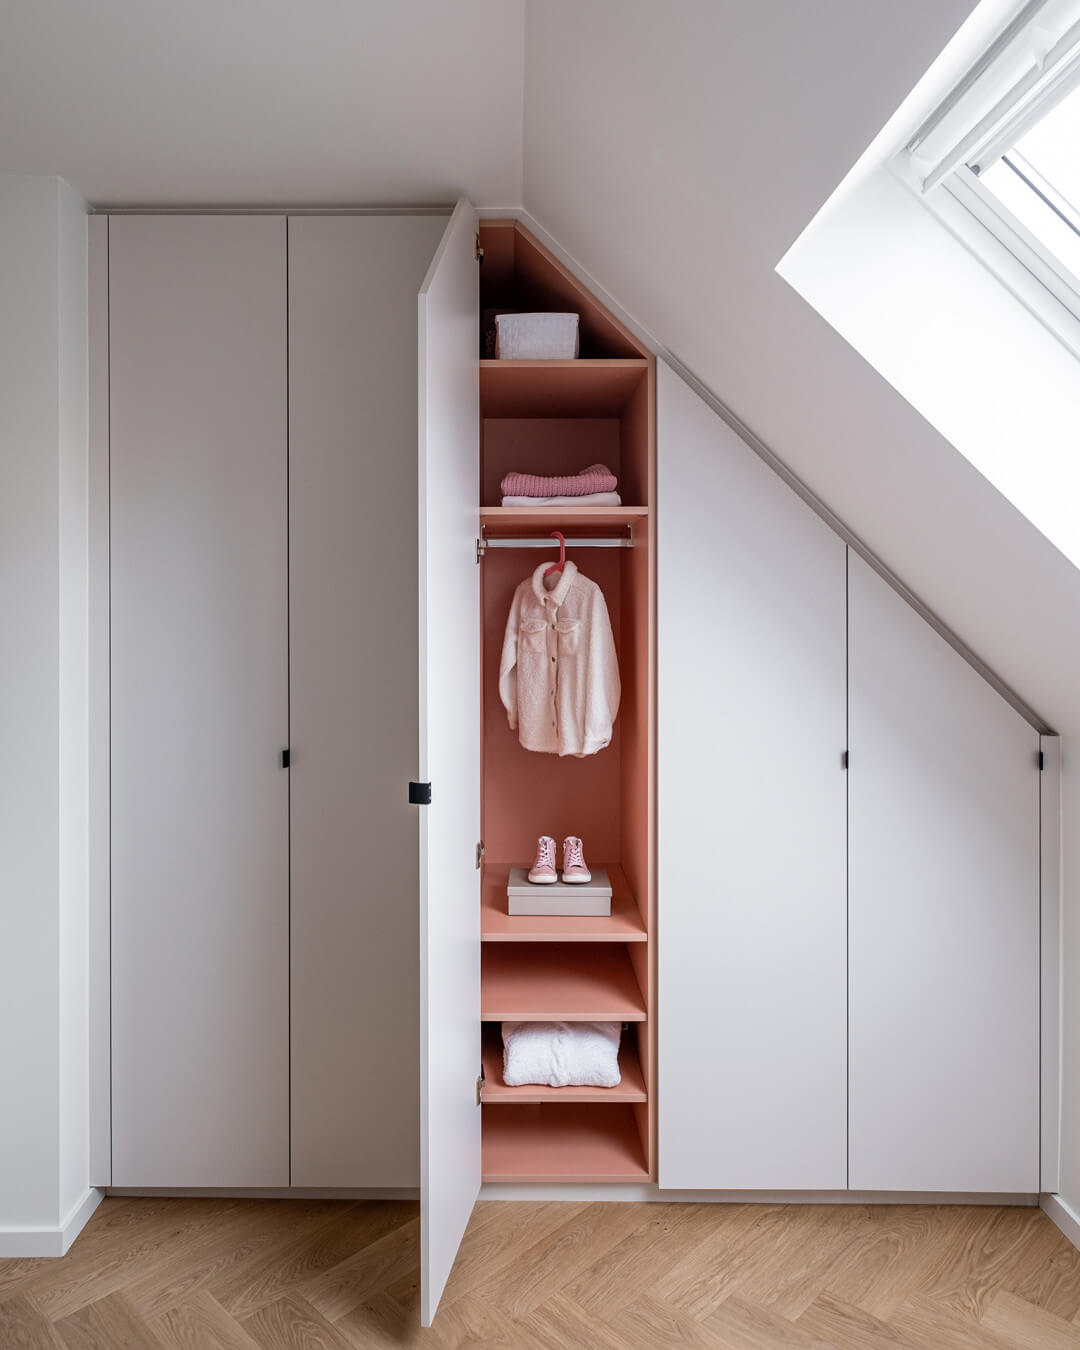 Custom-made wardrobe designed for an angled ceiling, featuring Dusty Coral as the interior color